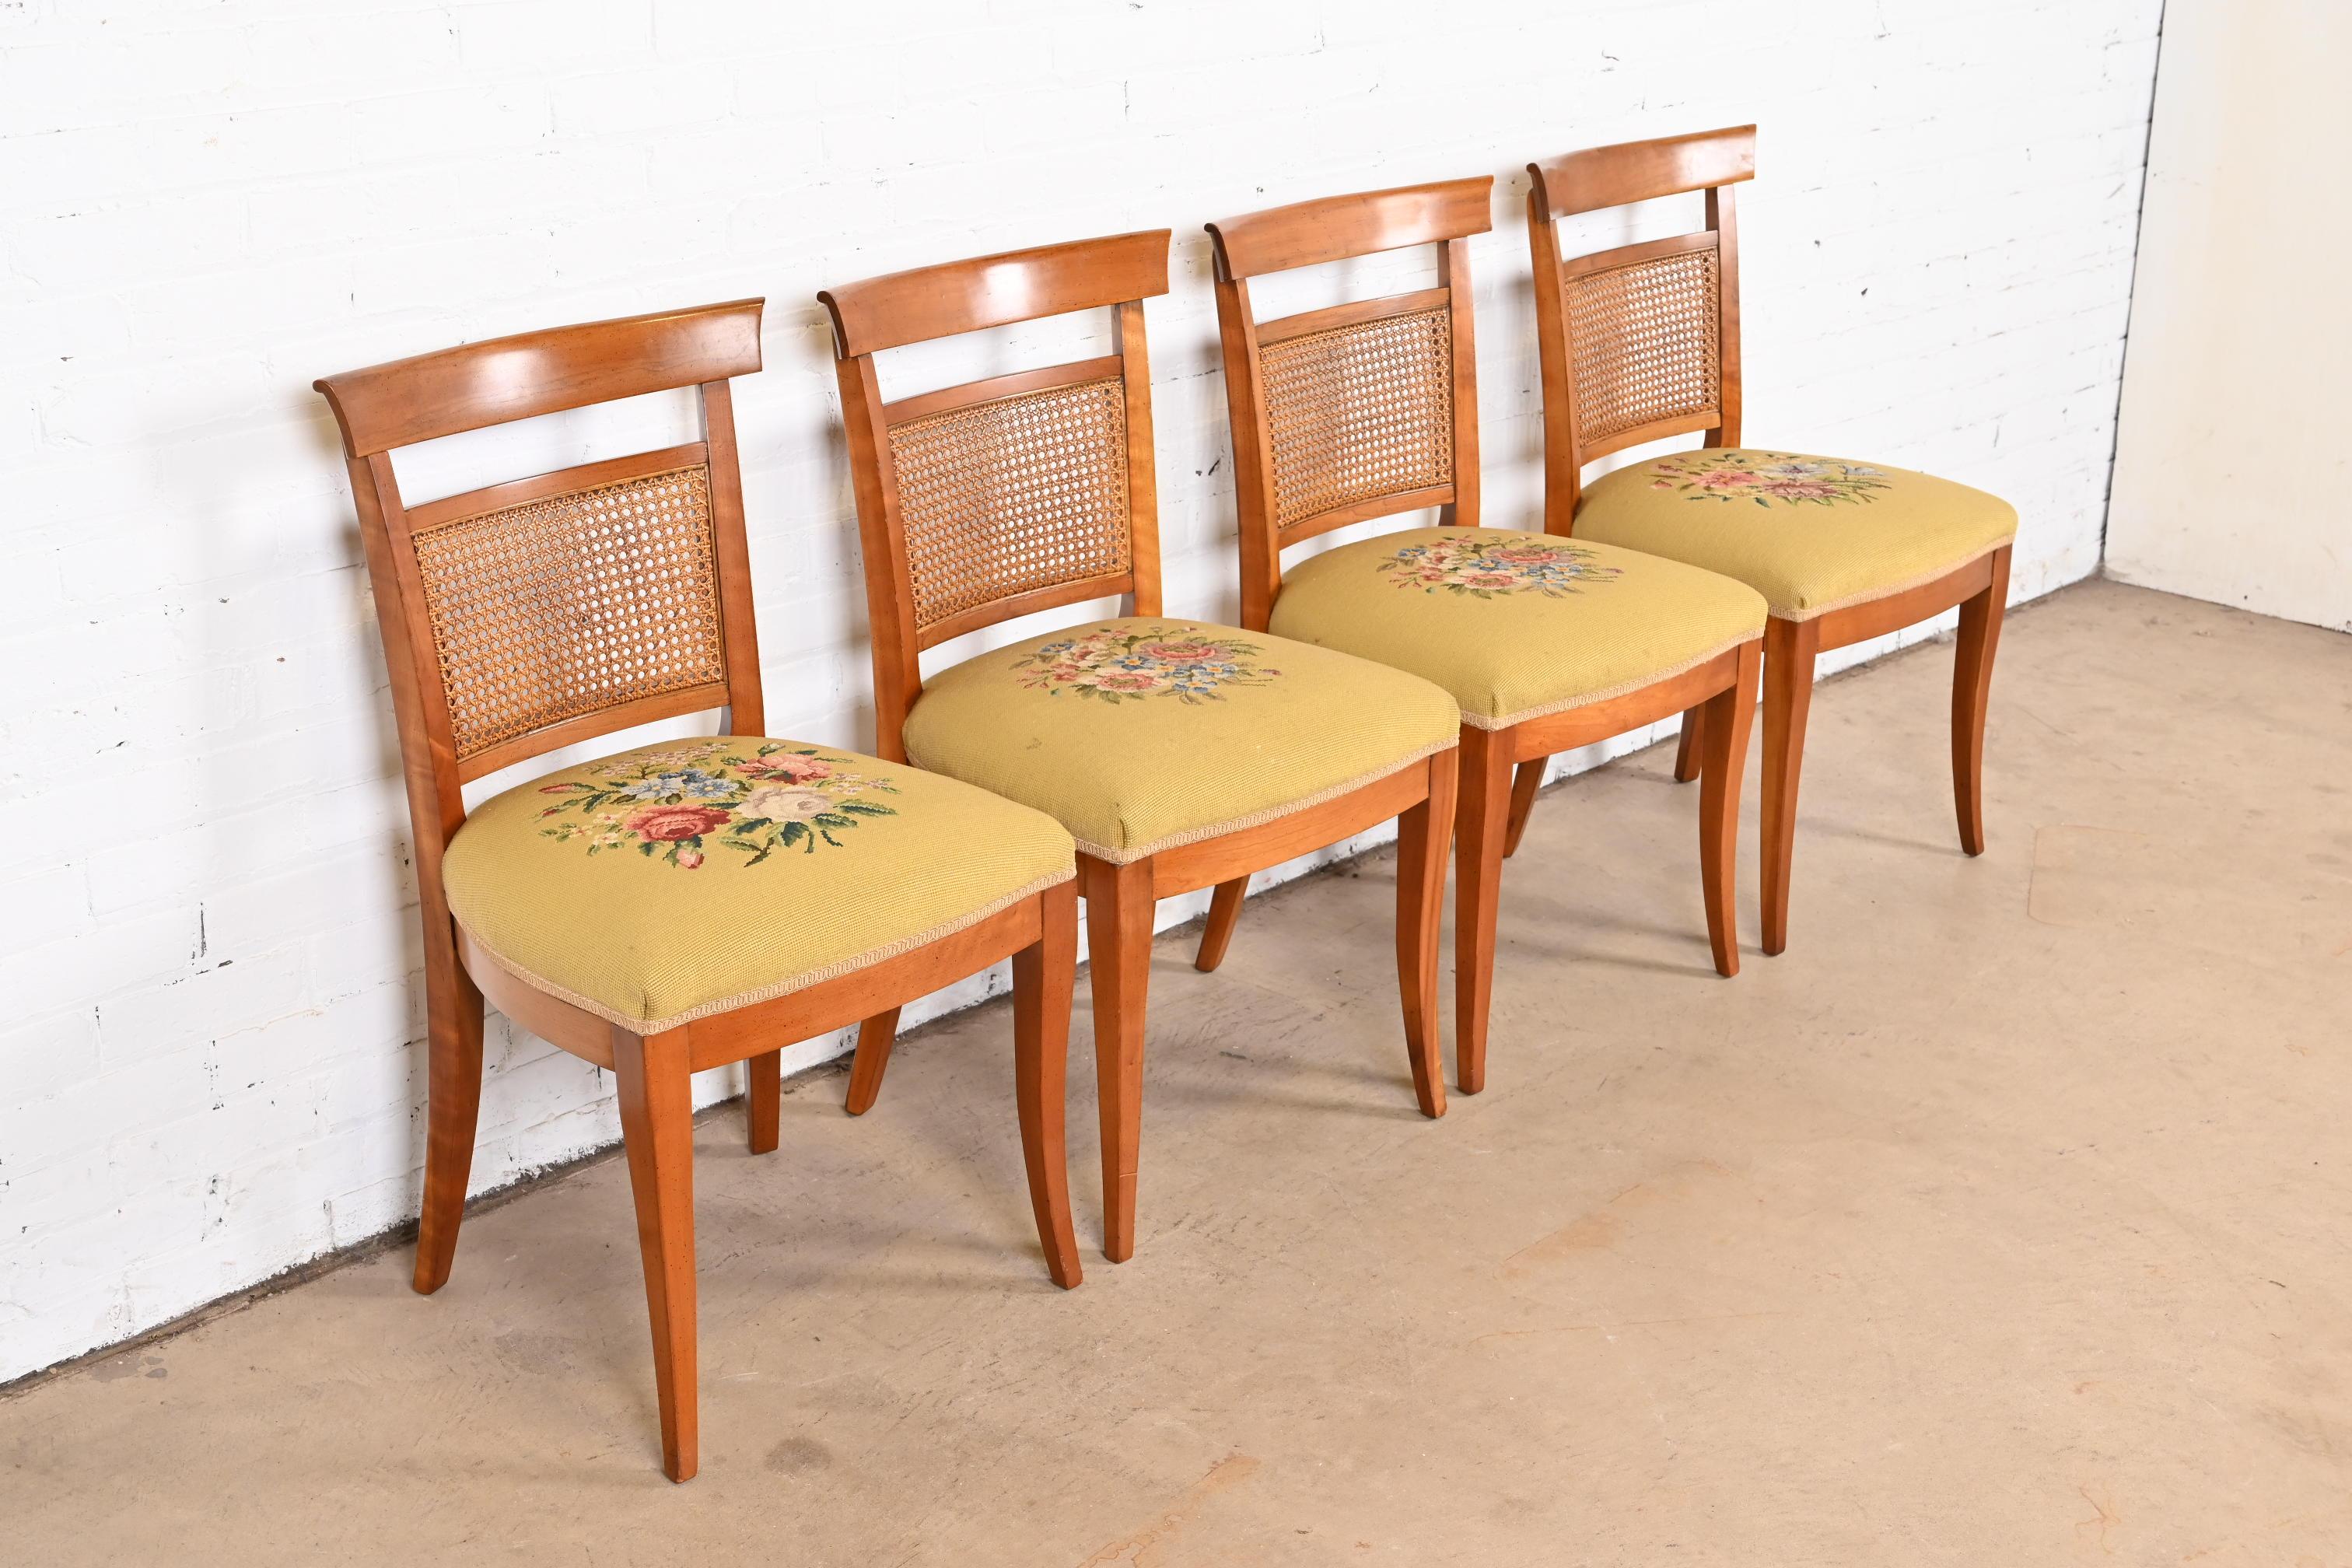 Mid-20th Century Kindel Furniture French Regency Cherry Wood and Cane Dining Chairs, Set of Four For Sale